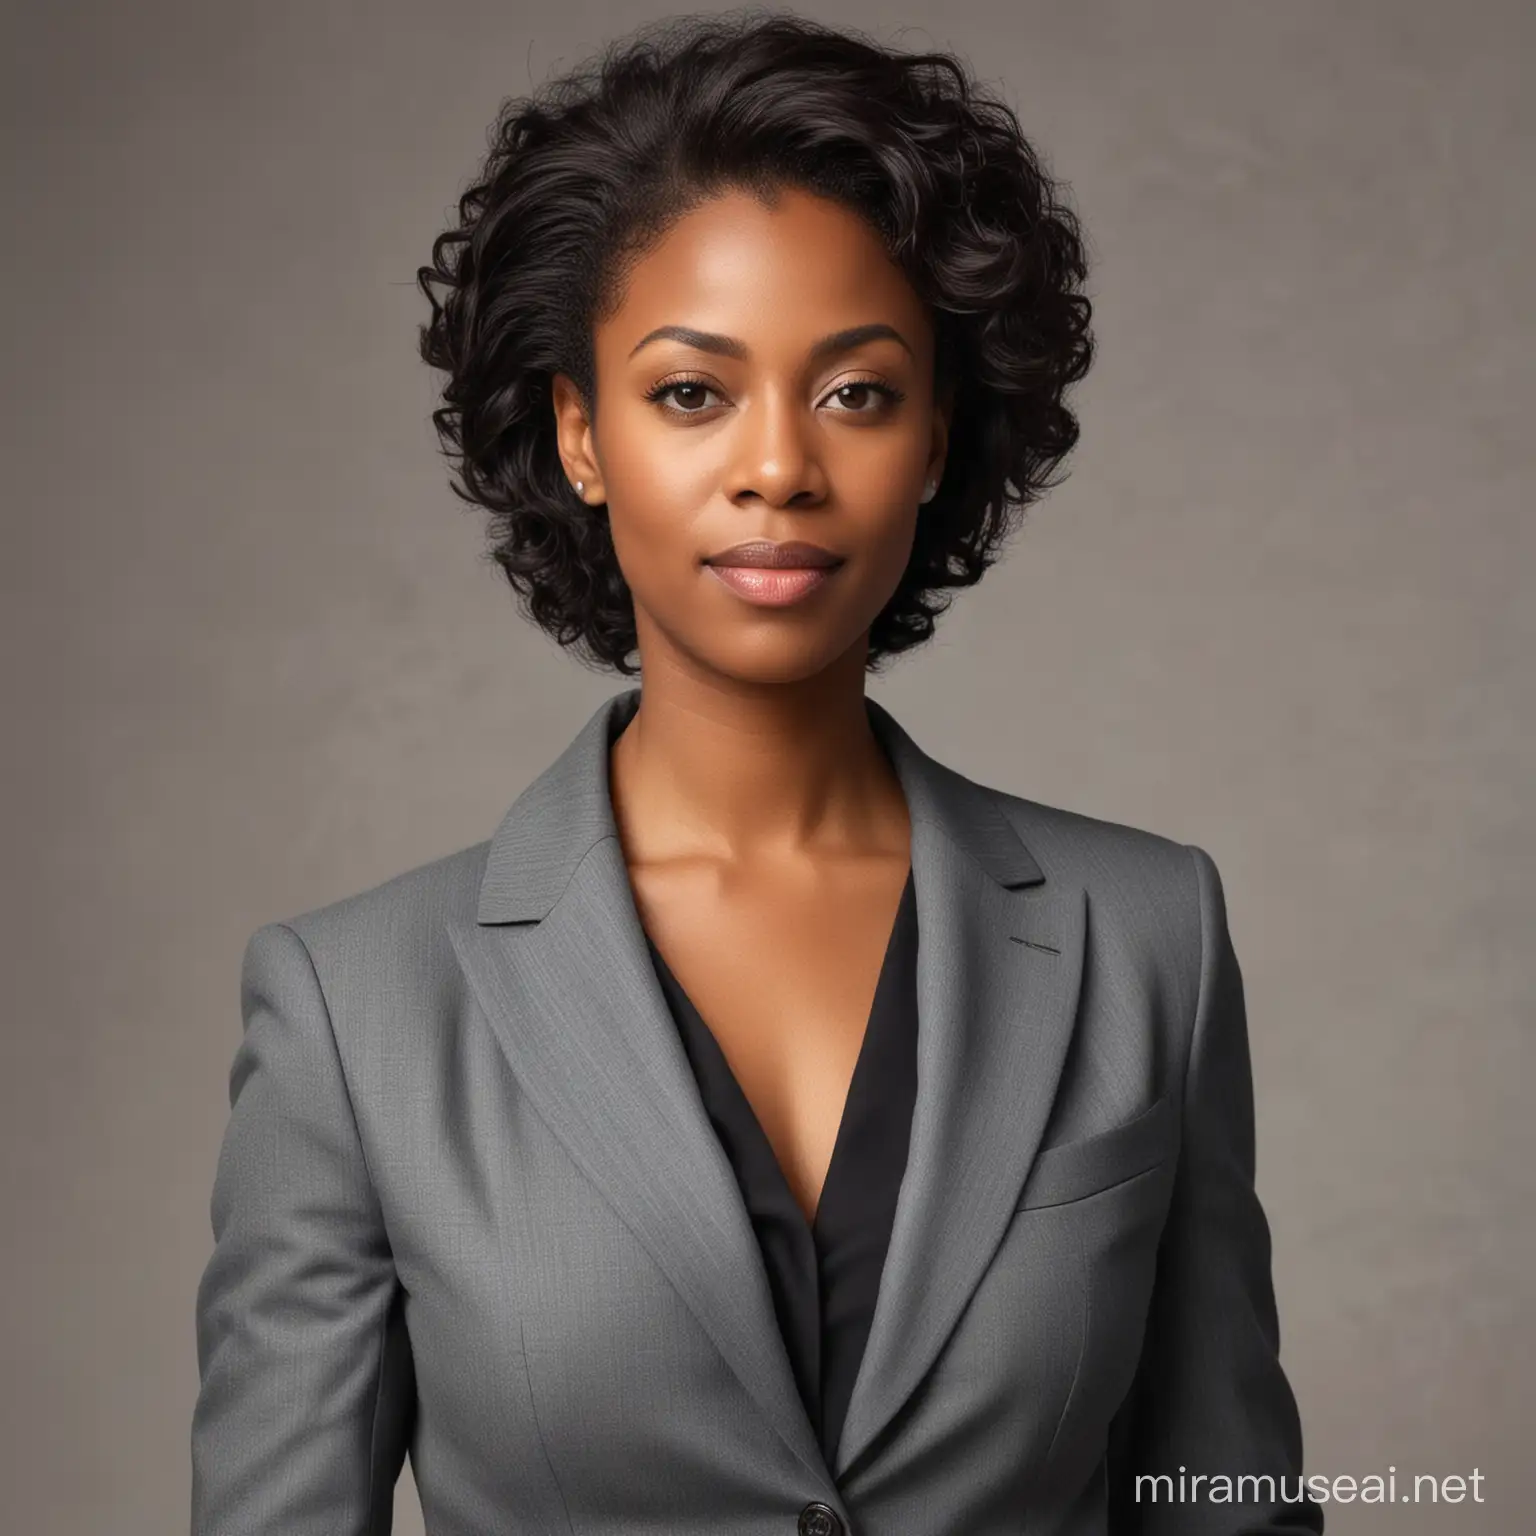 Stylish Black Woman in her 40s Wearing a Professional Suit